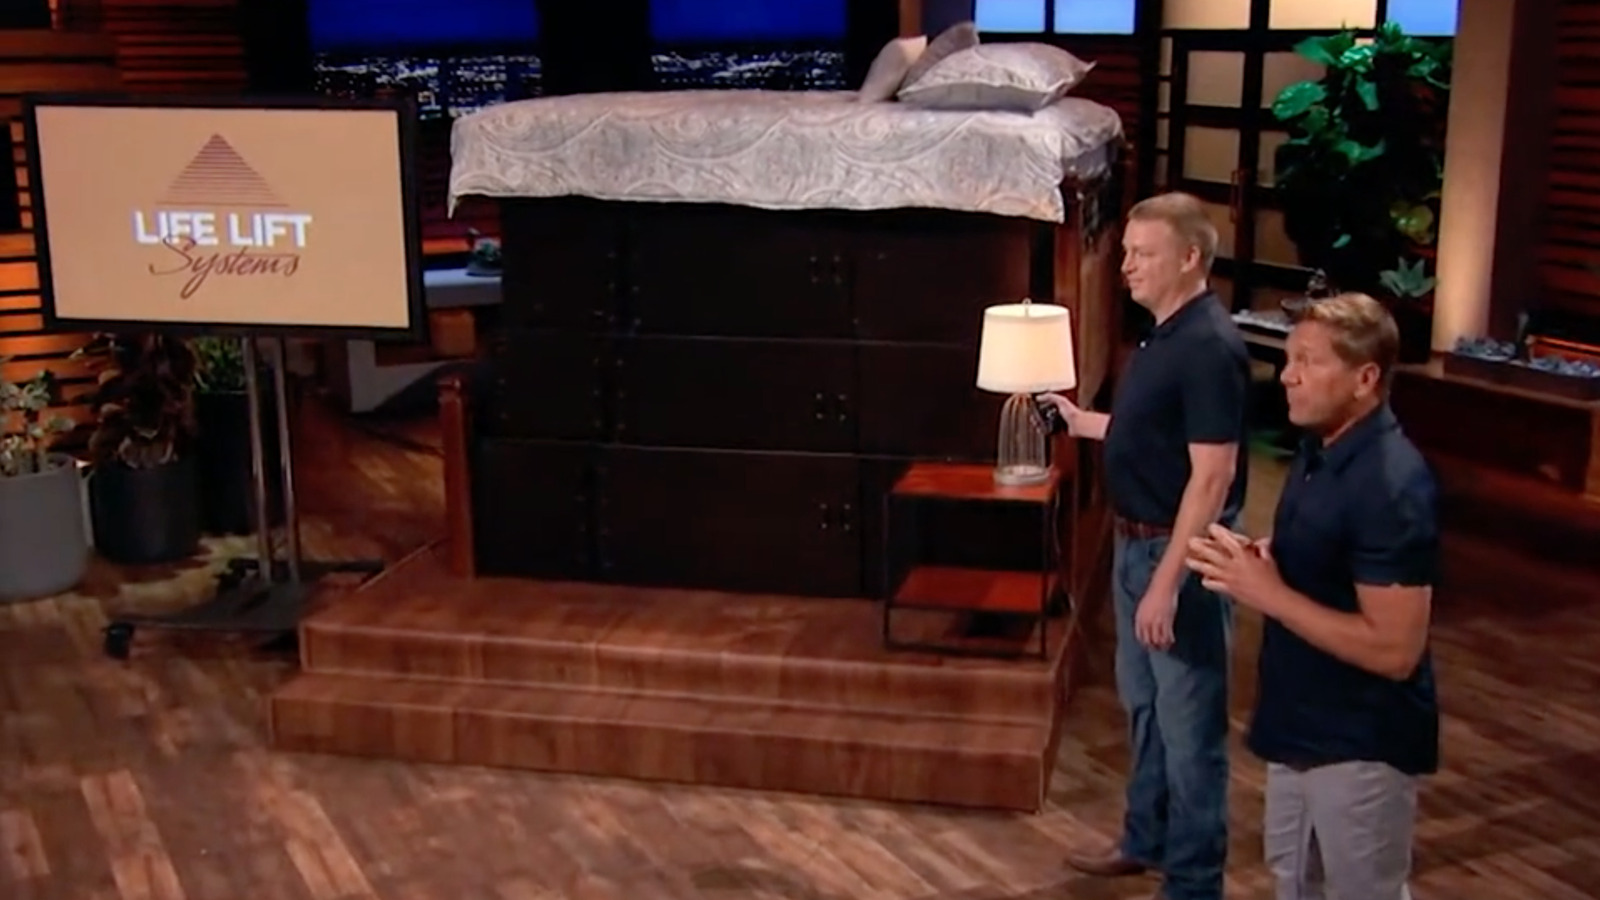 Whatever Happened To Storm Shelter Bed By Life Lift Systems After Shark Tank  Season 10?